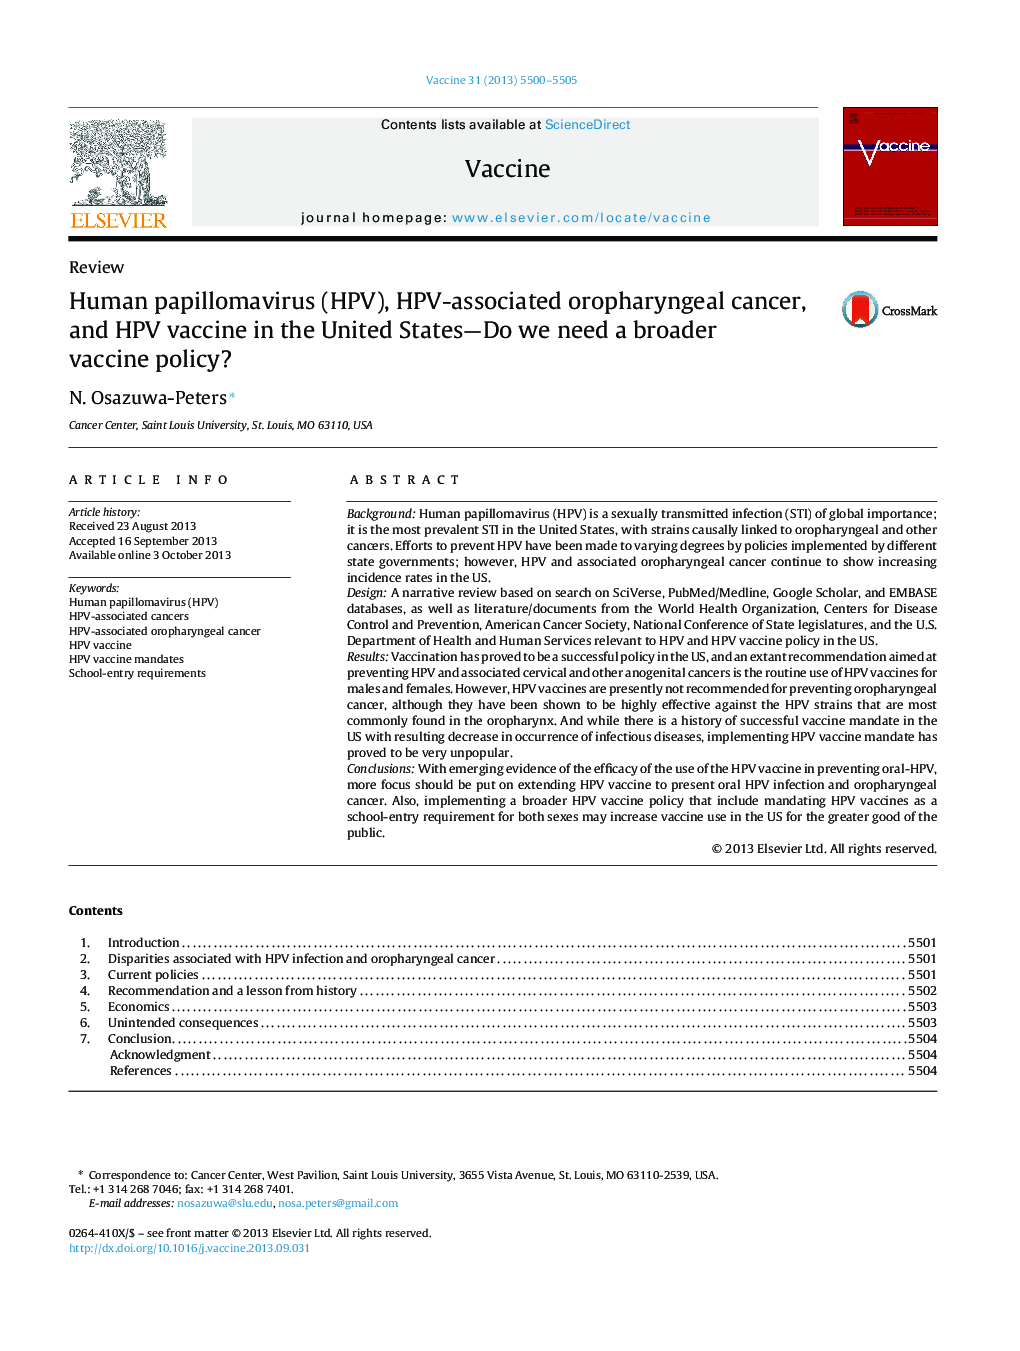 Human papillomavirus (HPV), HPV-associated oropharyngeal cancer, and HPV vaccine in the United States-Do we need a broader vaccine policy?